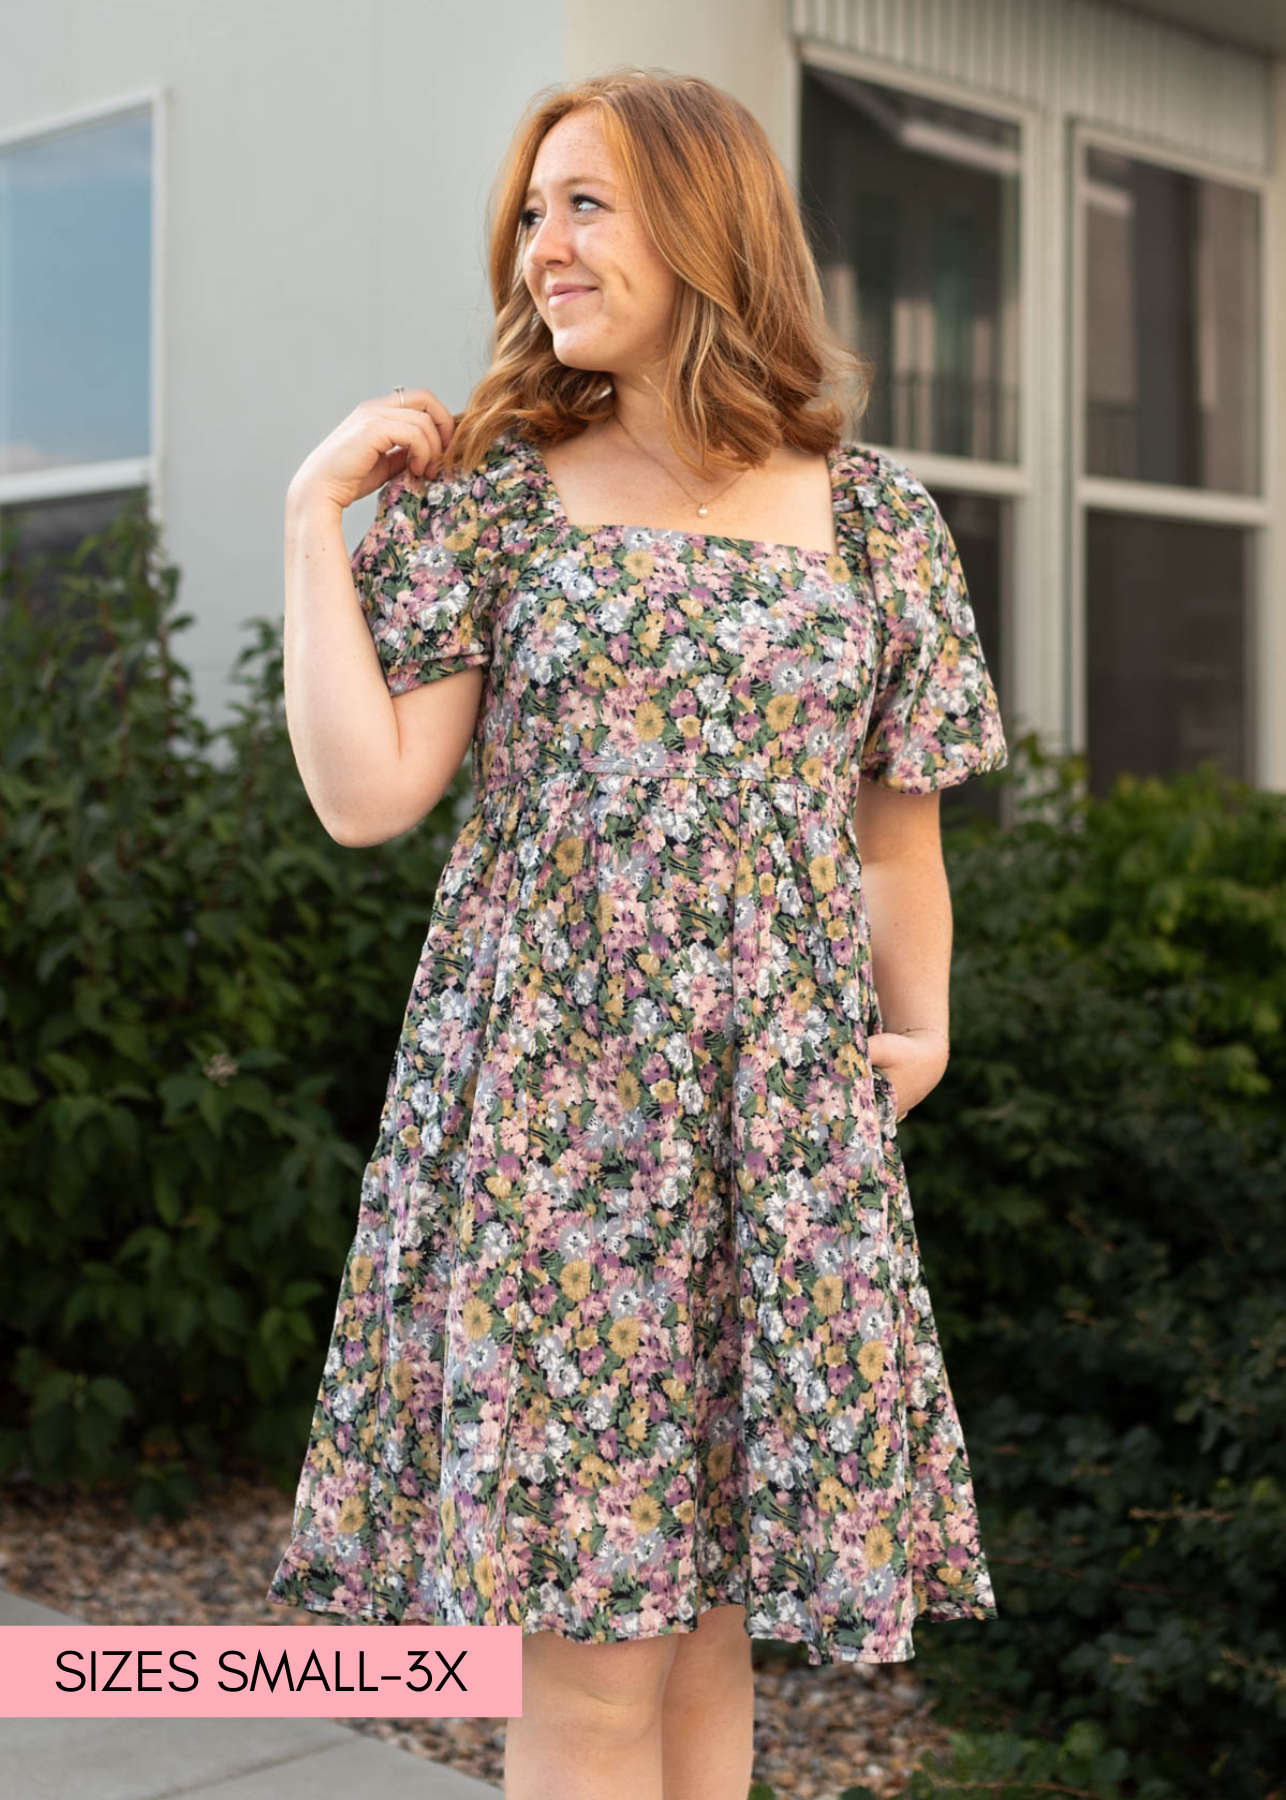 Floral dress with a square neck